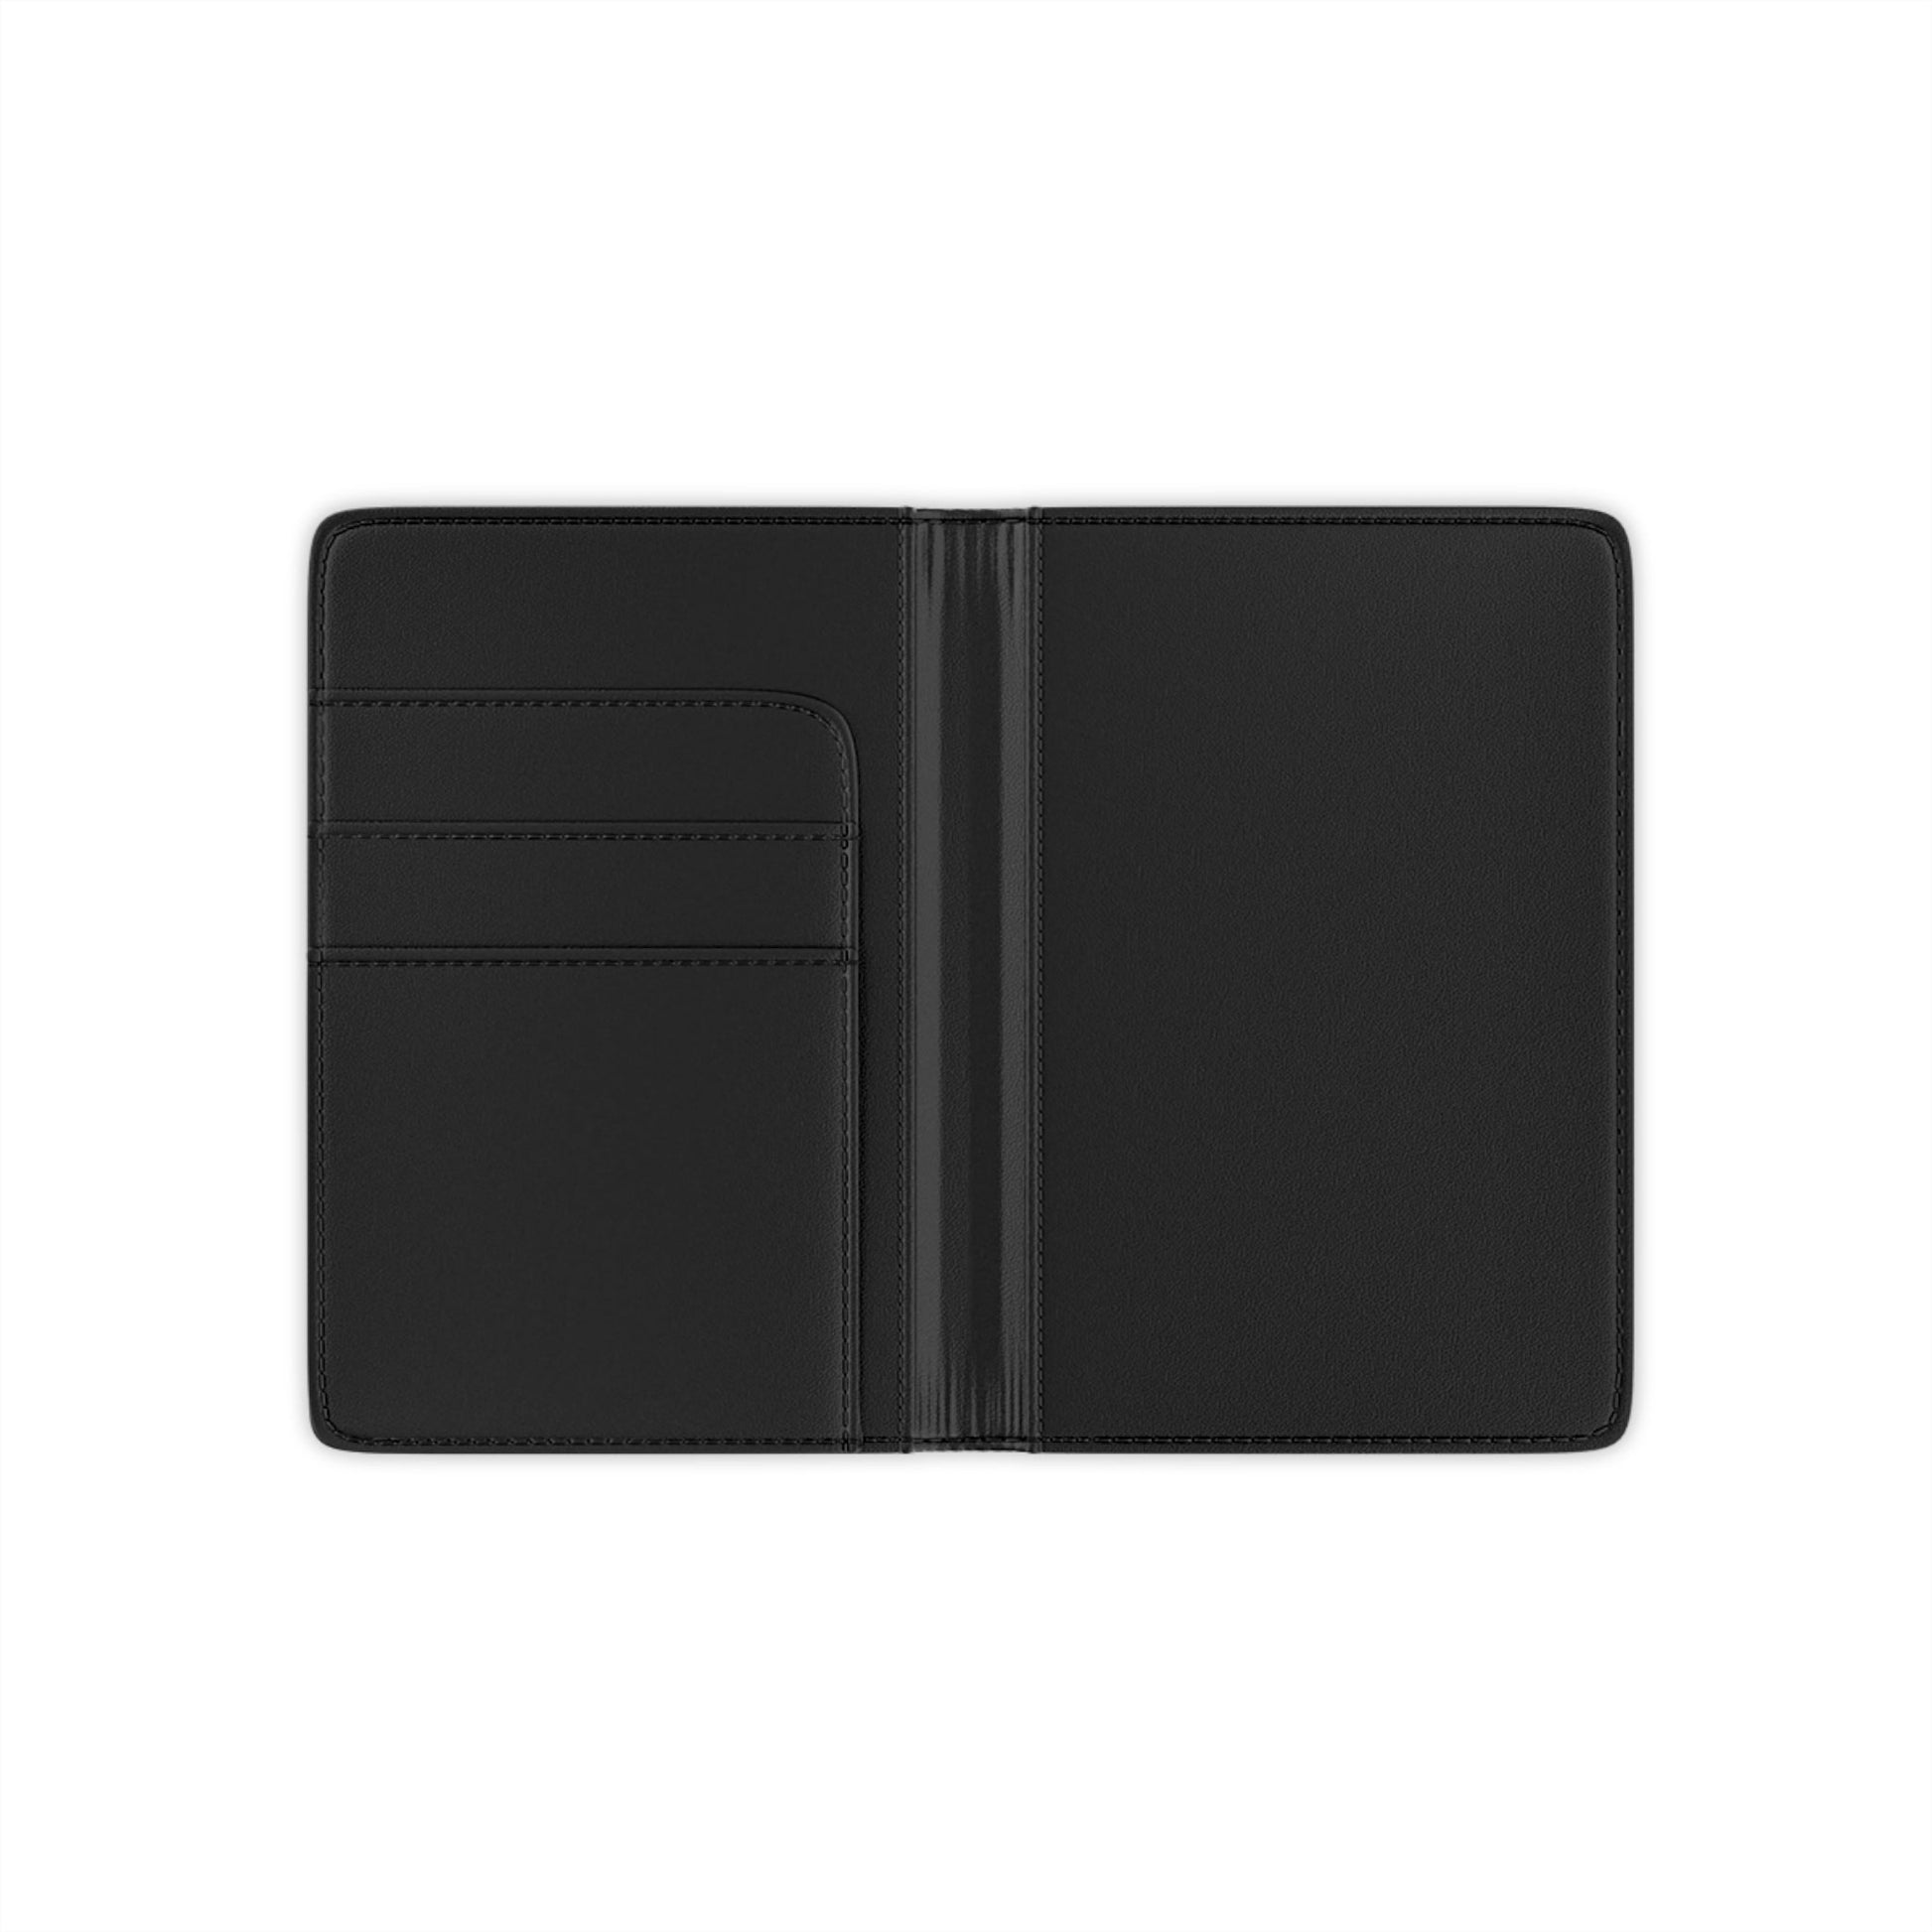 DONNY : Passport Cover - Shaggy Chic